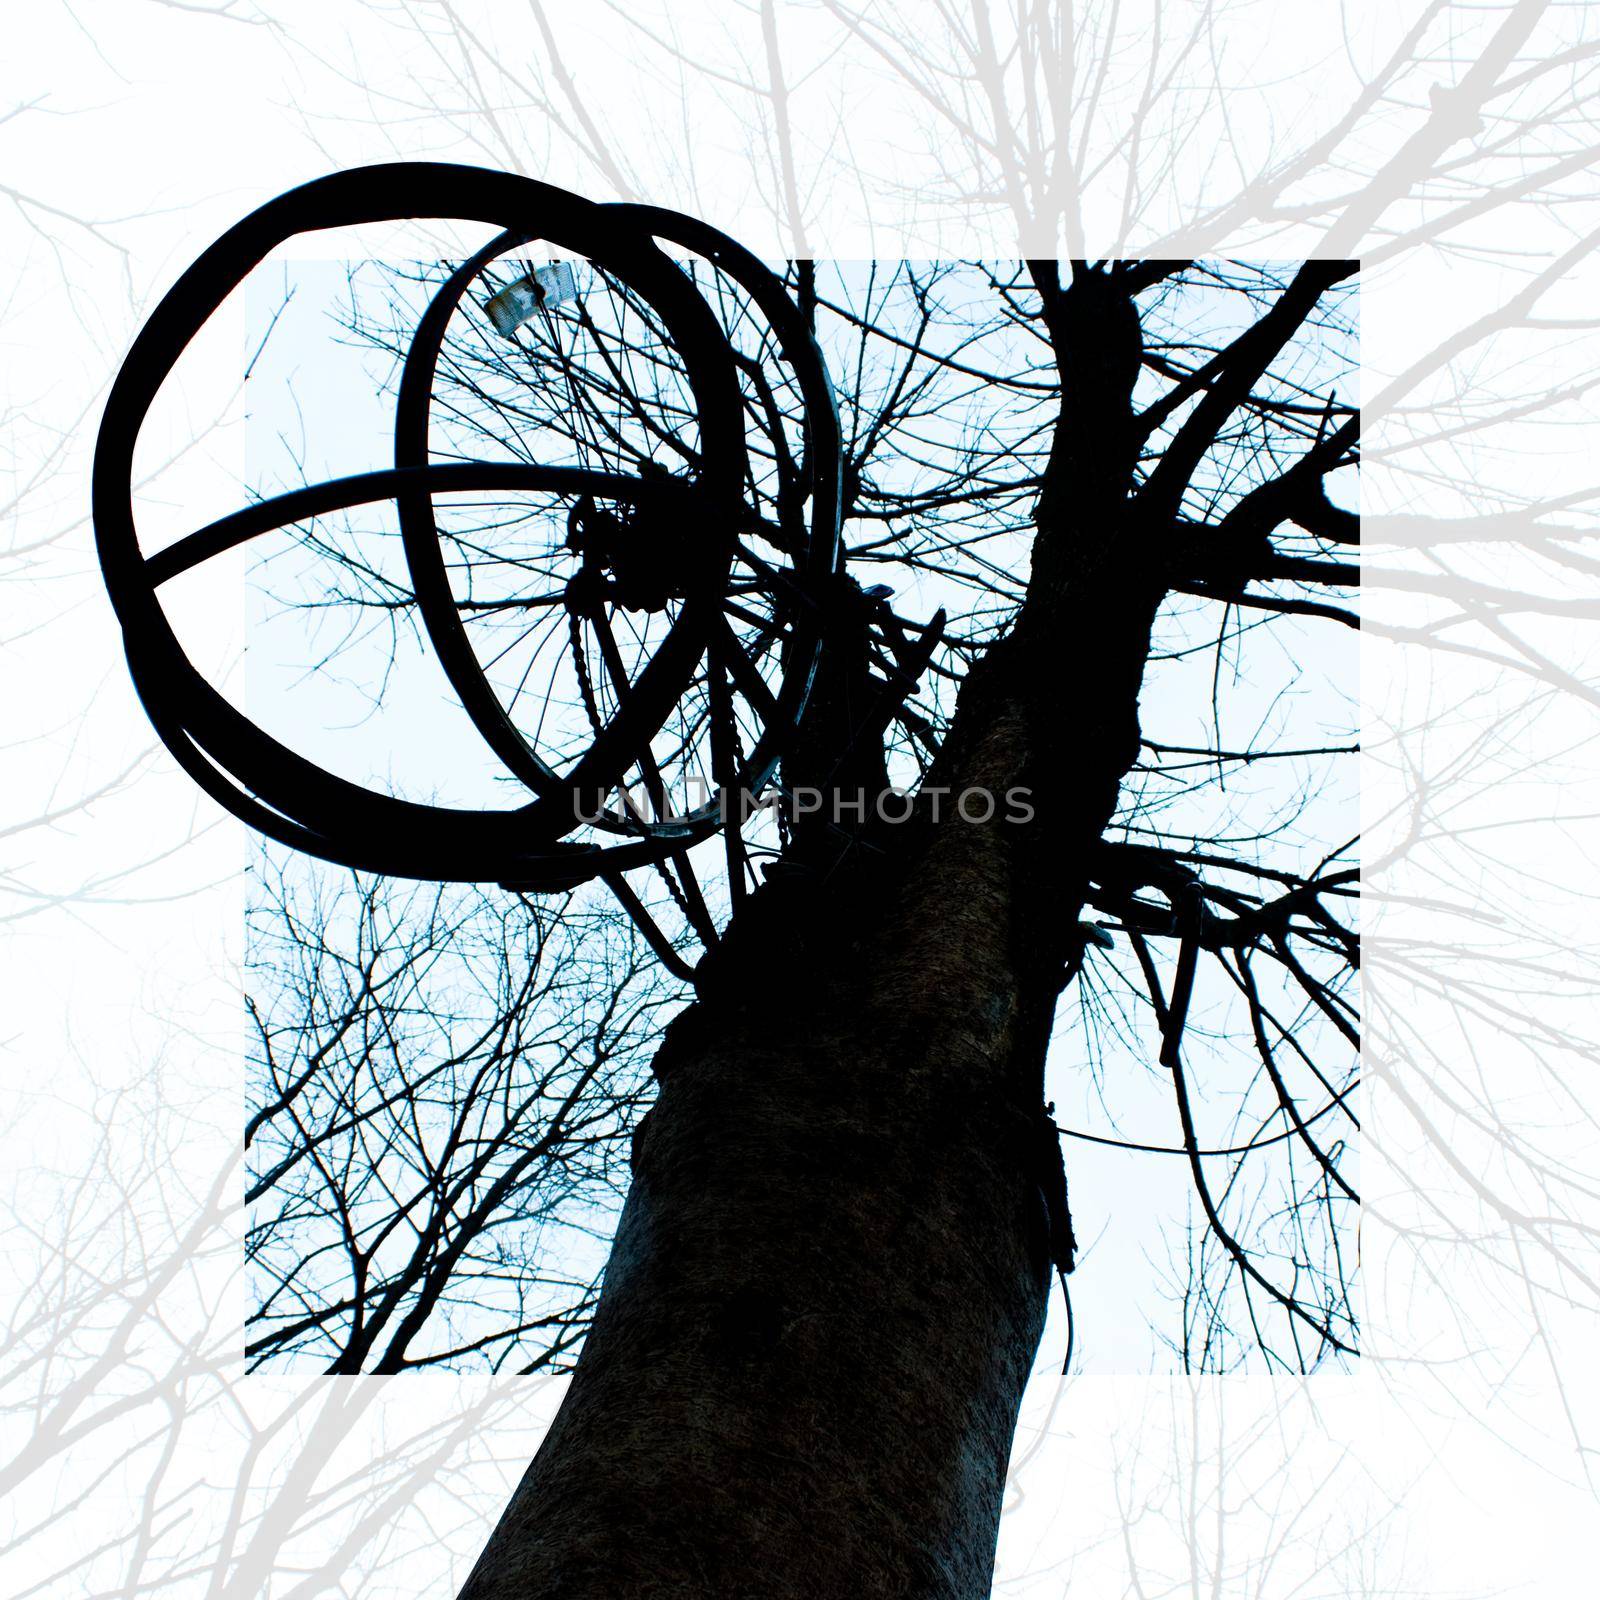 Silhouette of a tree with a hanging cage trap against a blue sky with a translucent white frame by njproductions